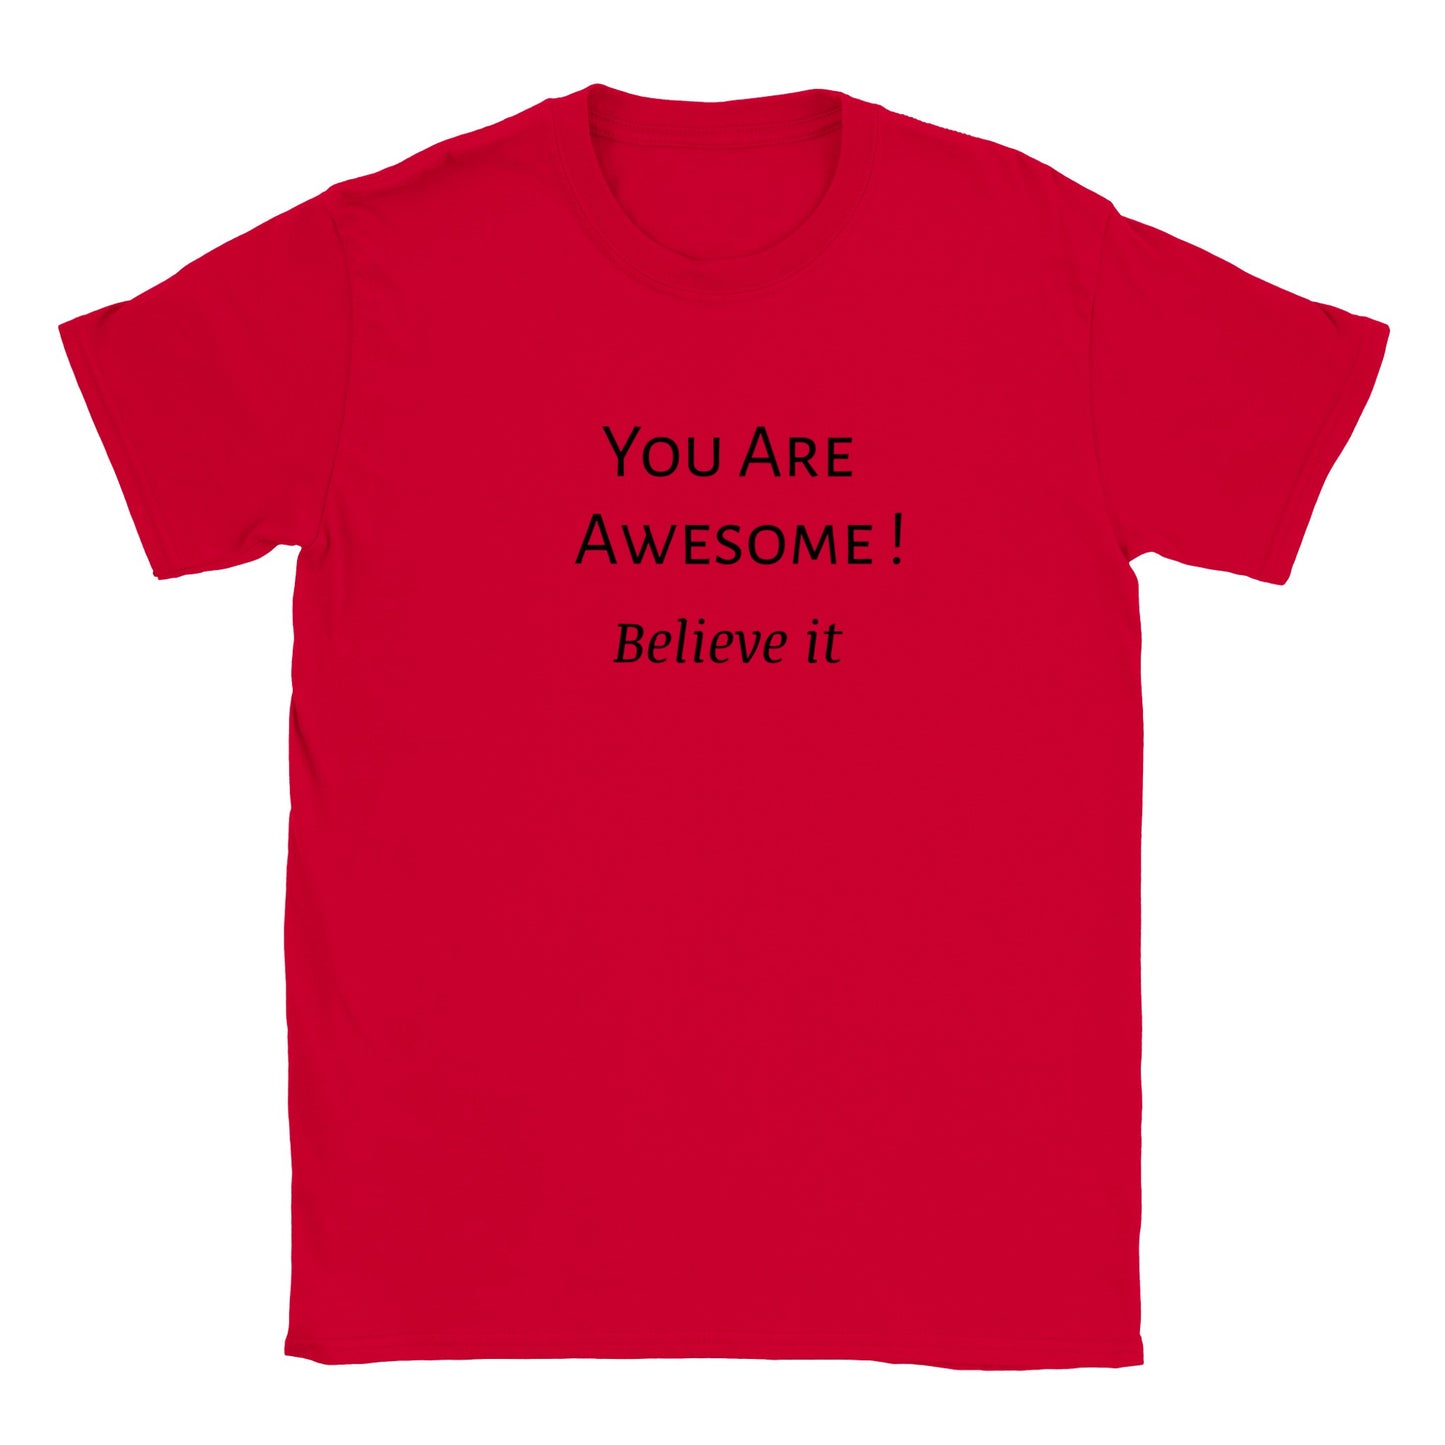 You Are Awesome! Classic Kids Crewneck T-shirt